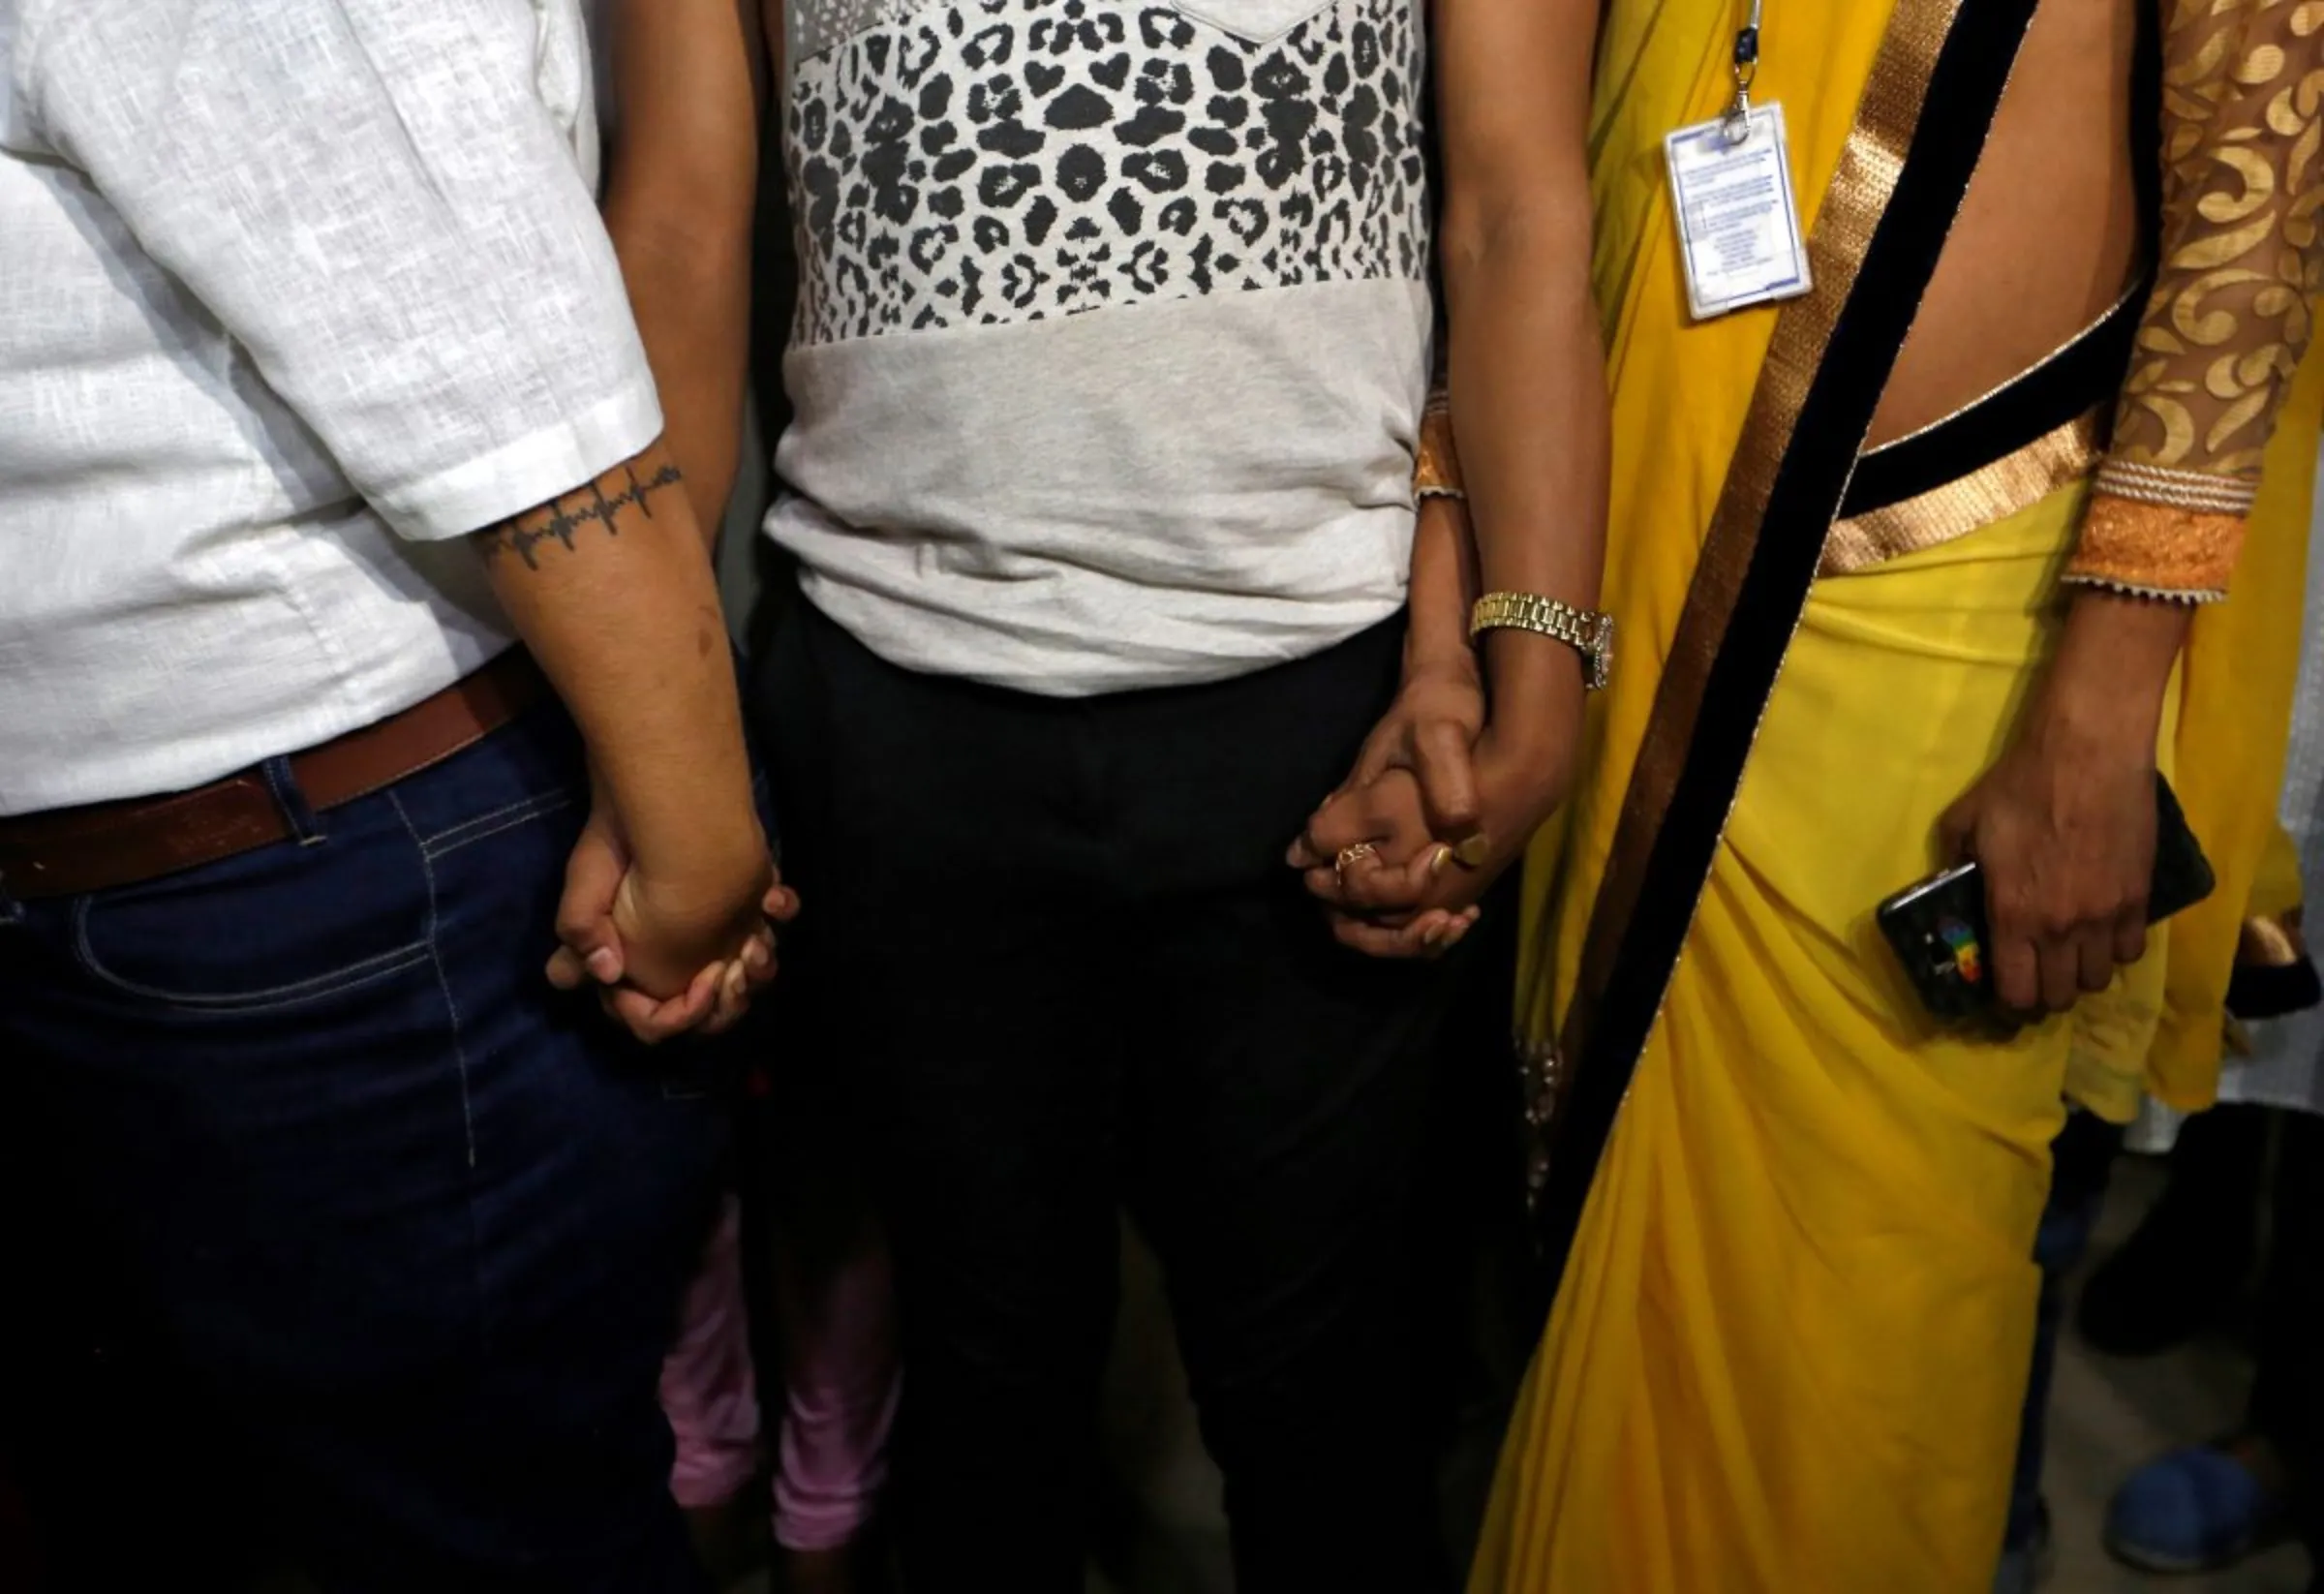 Supporters of the lesbian, gay, bisexual and transgender (LGBT) community hold hands as they wait for the Supreme Court's verdict on decriminalizing gay sex, at an NGO in Mumbai, India, September 6, 2018. REUTERS/Francis Mascarenhas